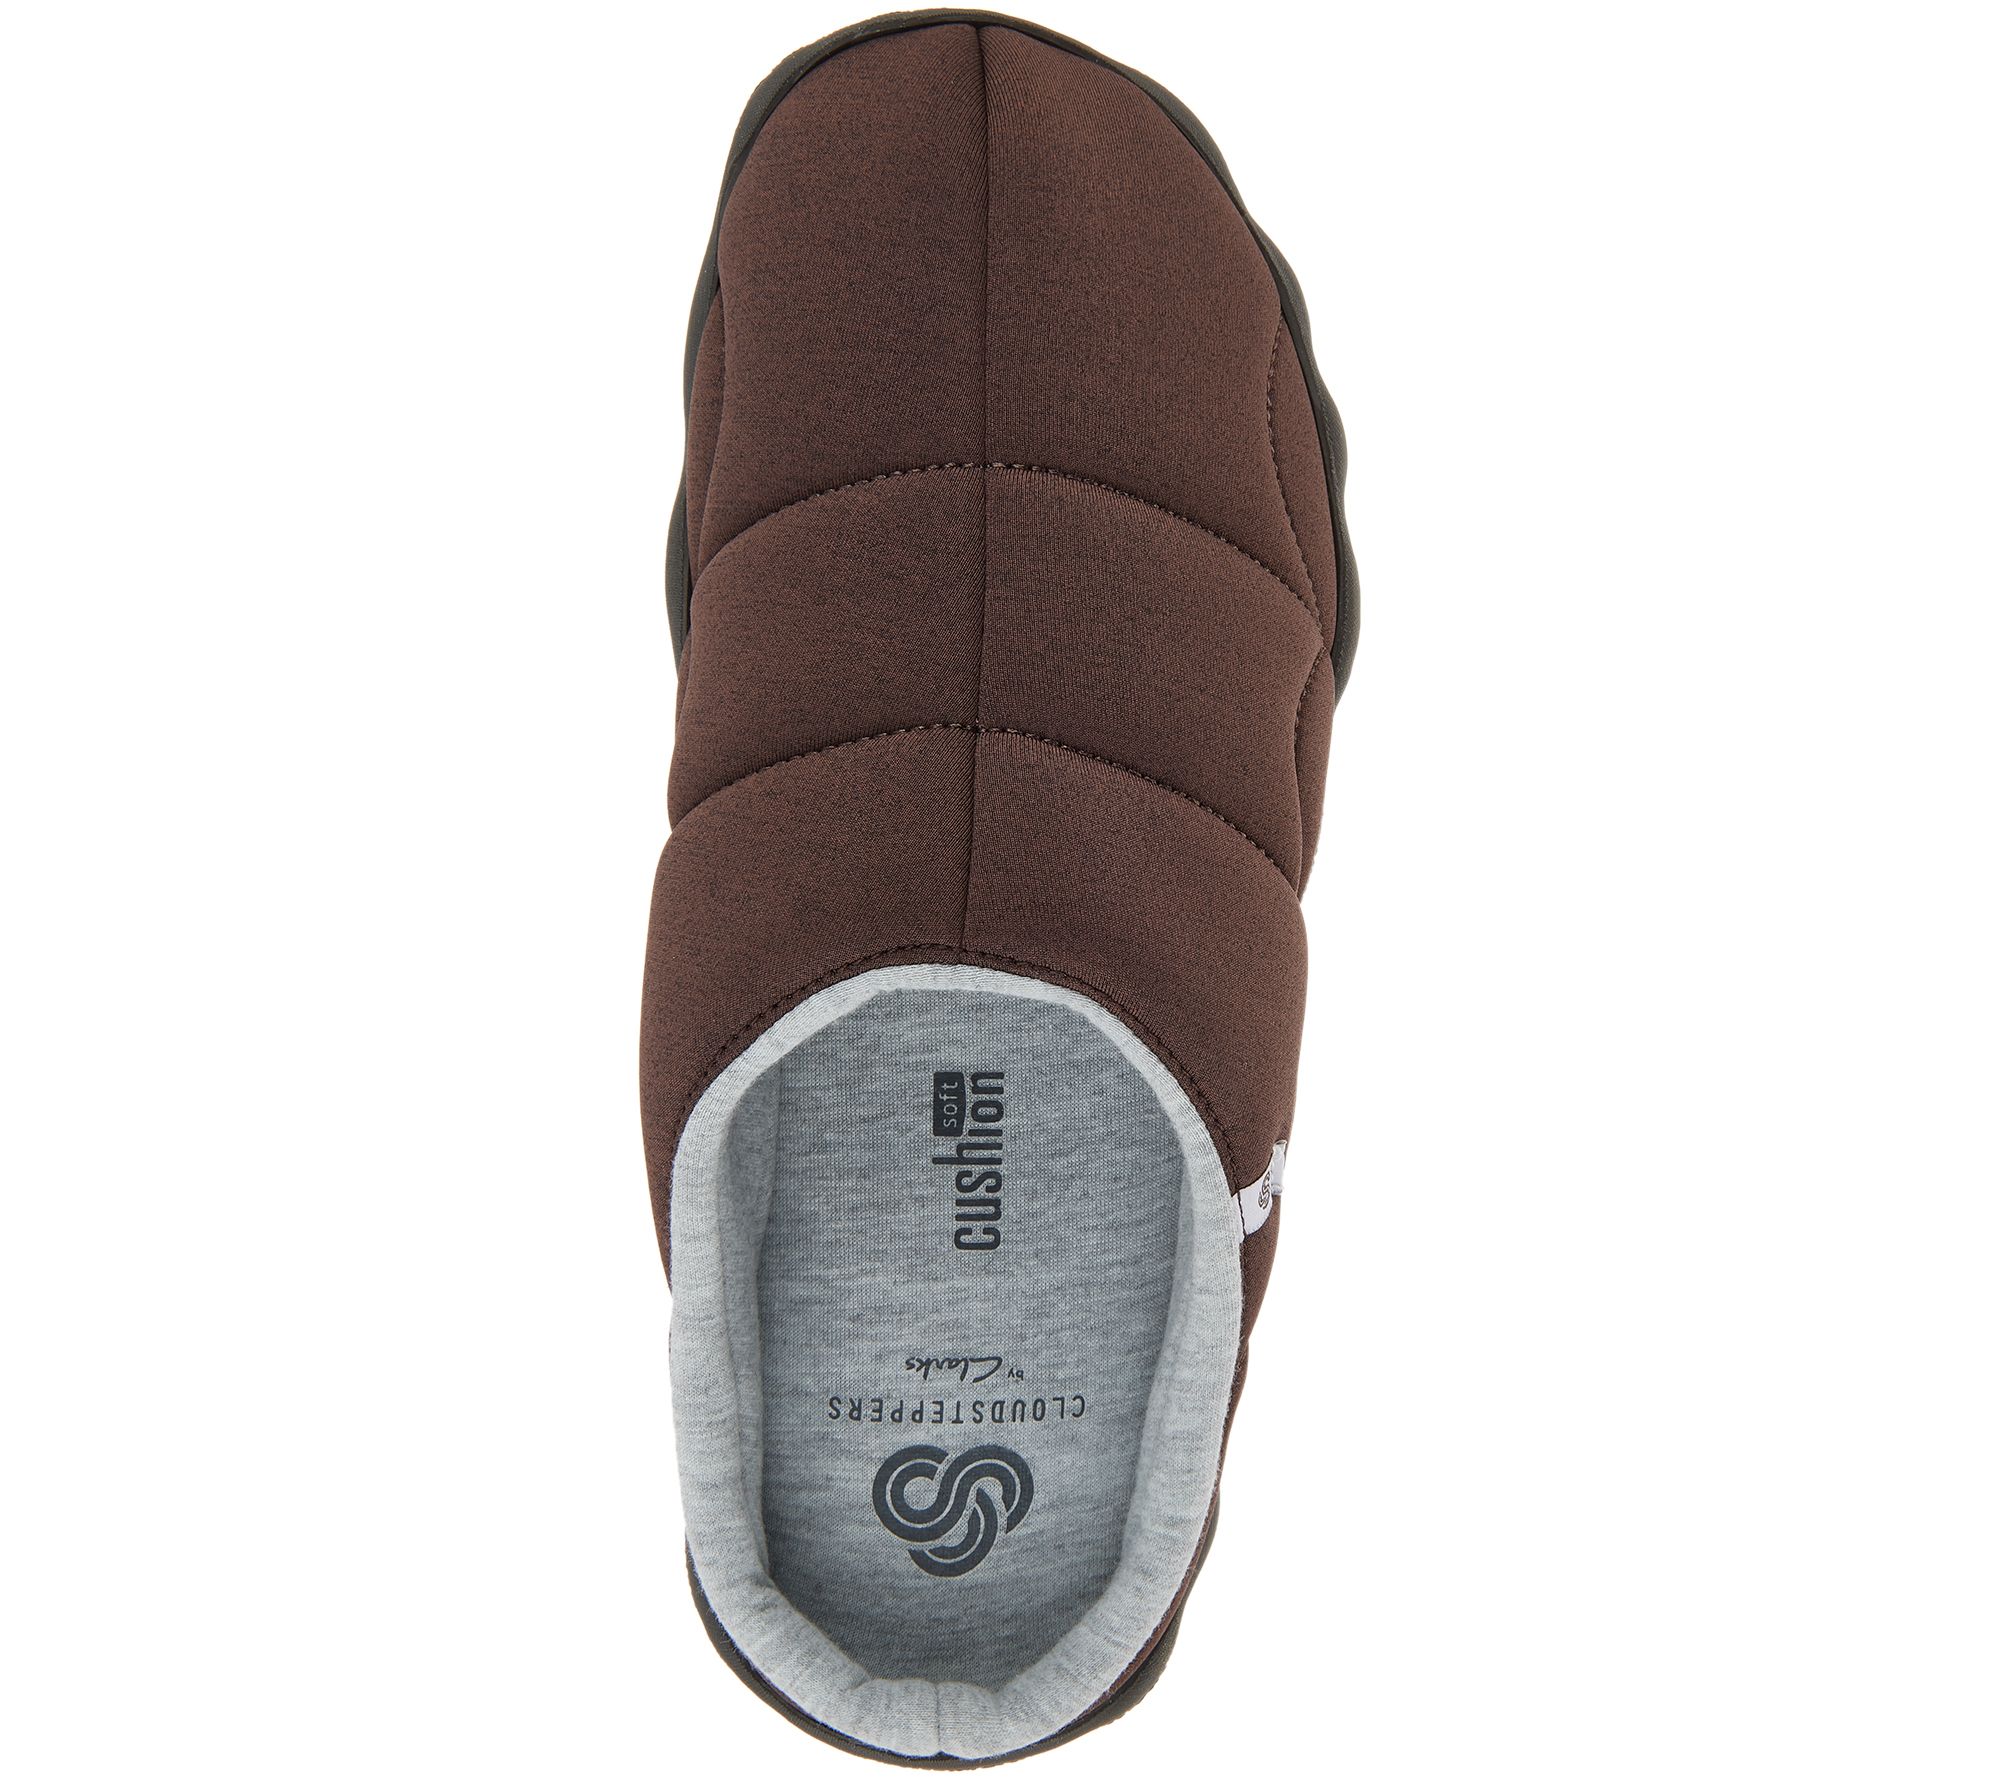 cloudsteppers by clarks jersey slippers